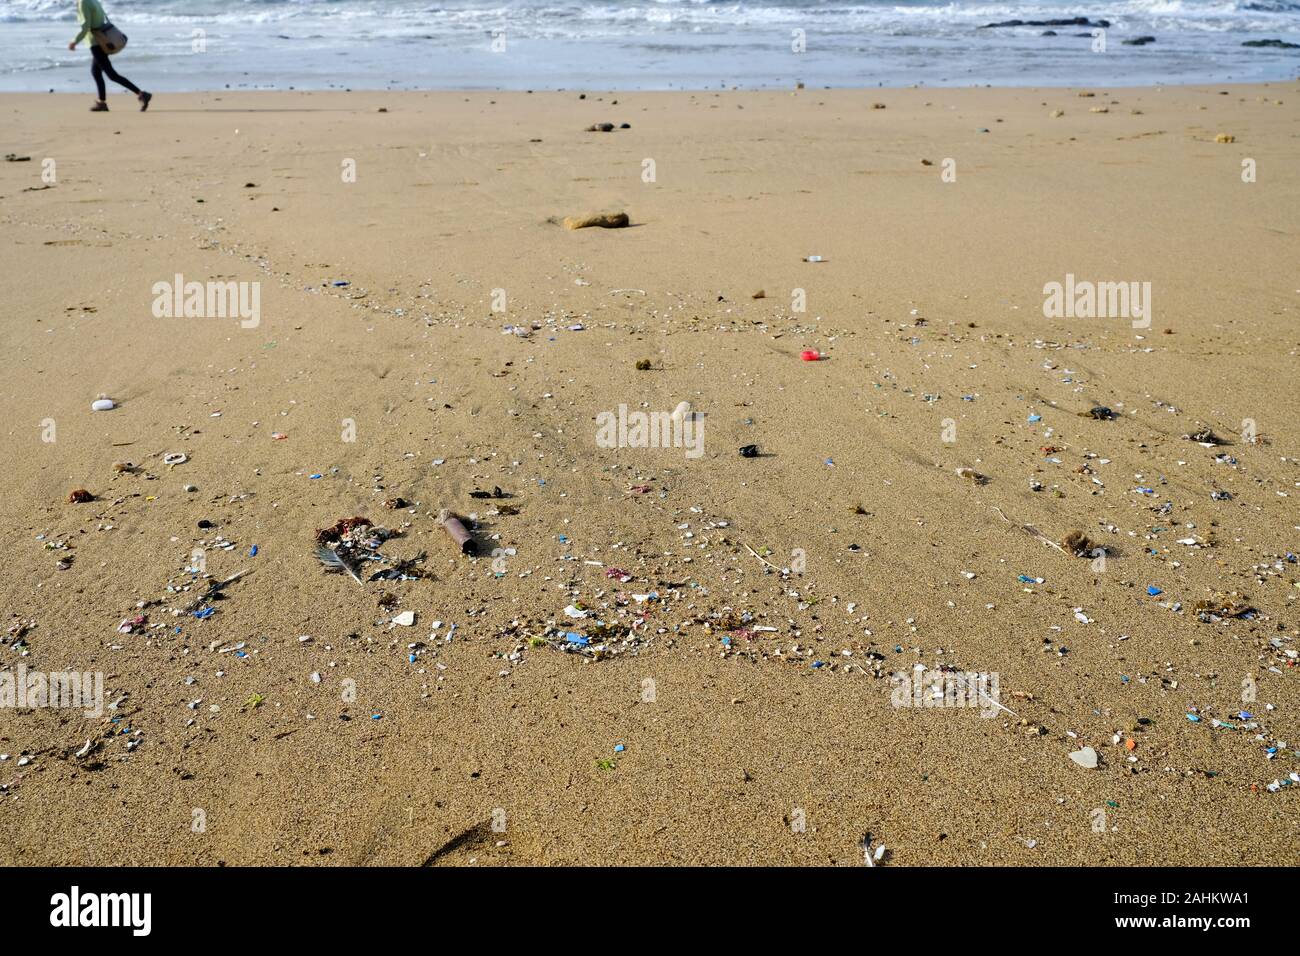 Polluted beach with microplastics and a human figure in the background. Stock Photo